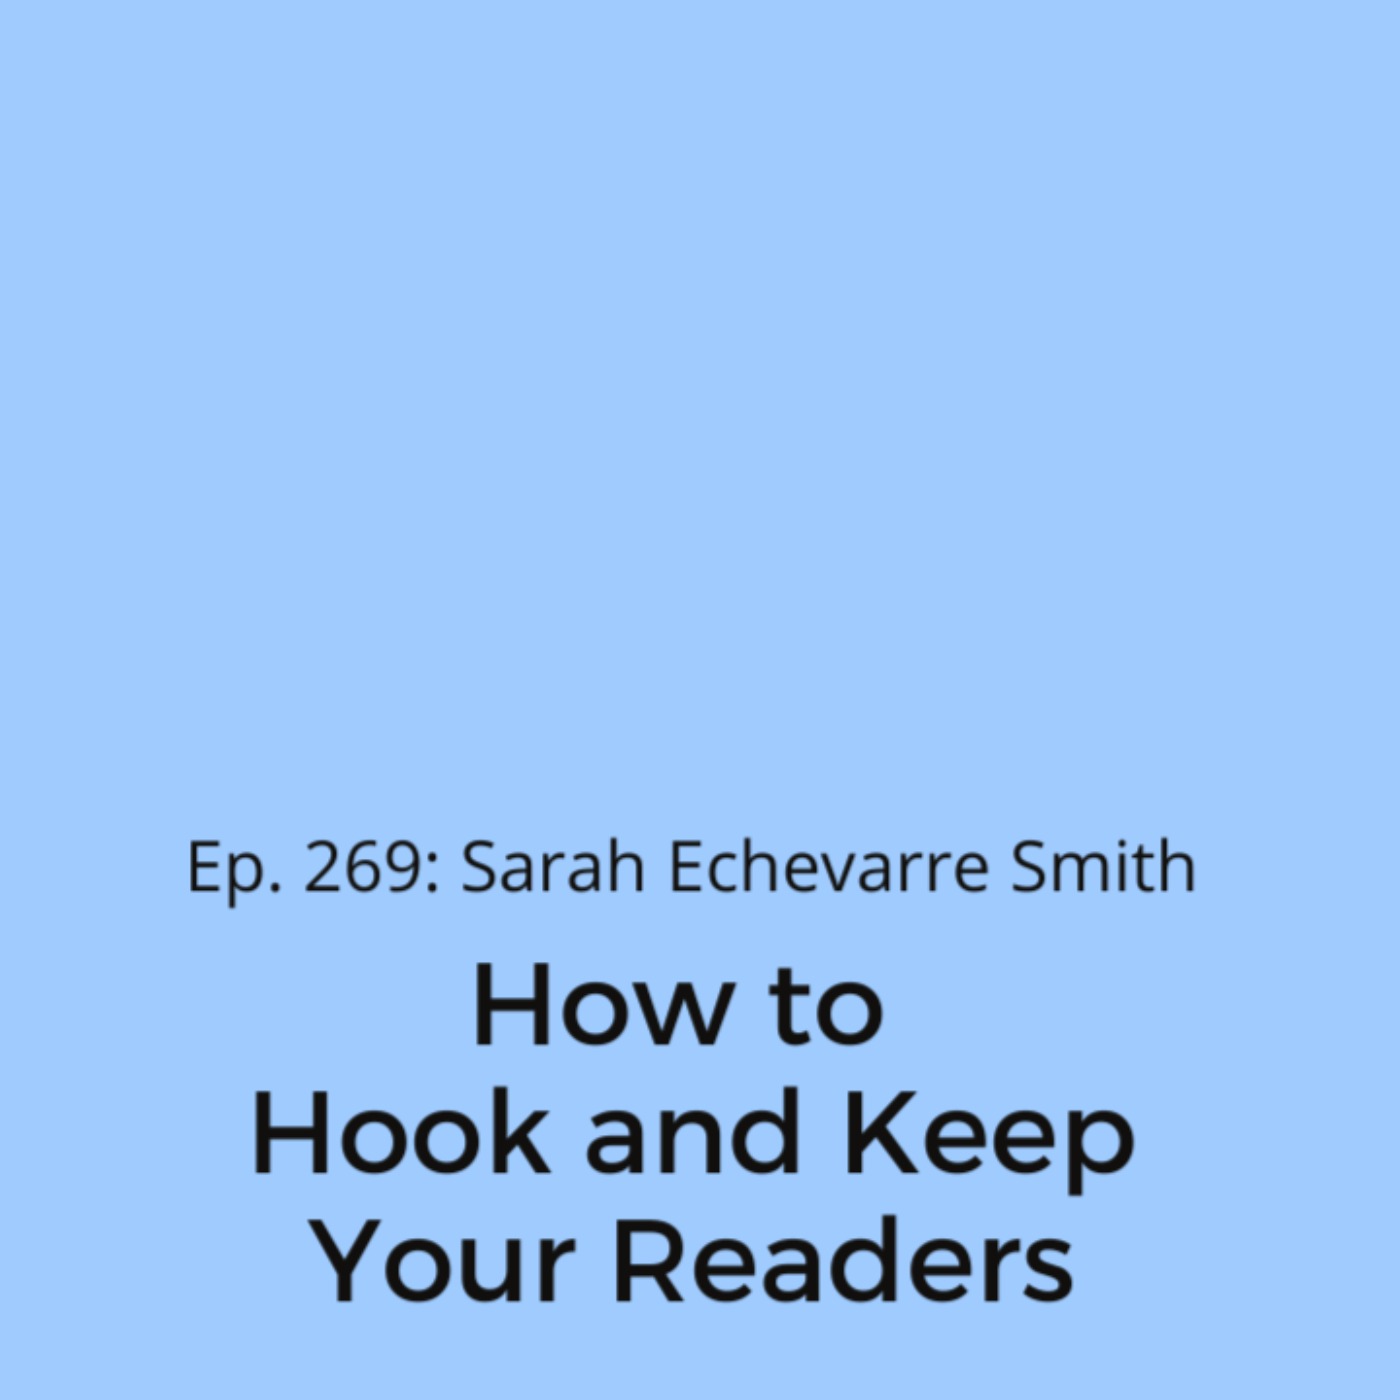 Ep. 269: Sarah Echevarre Smith on How to Hook and Keep Your Readers